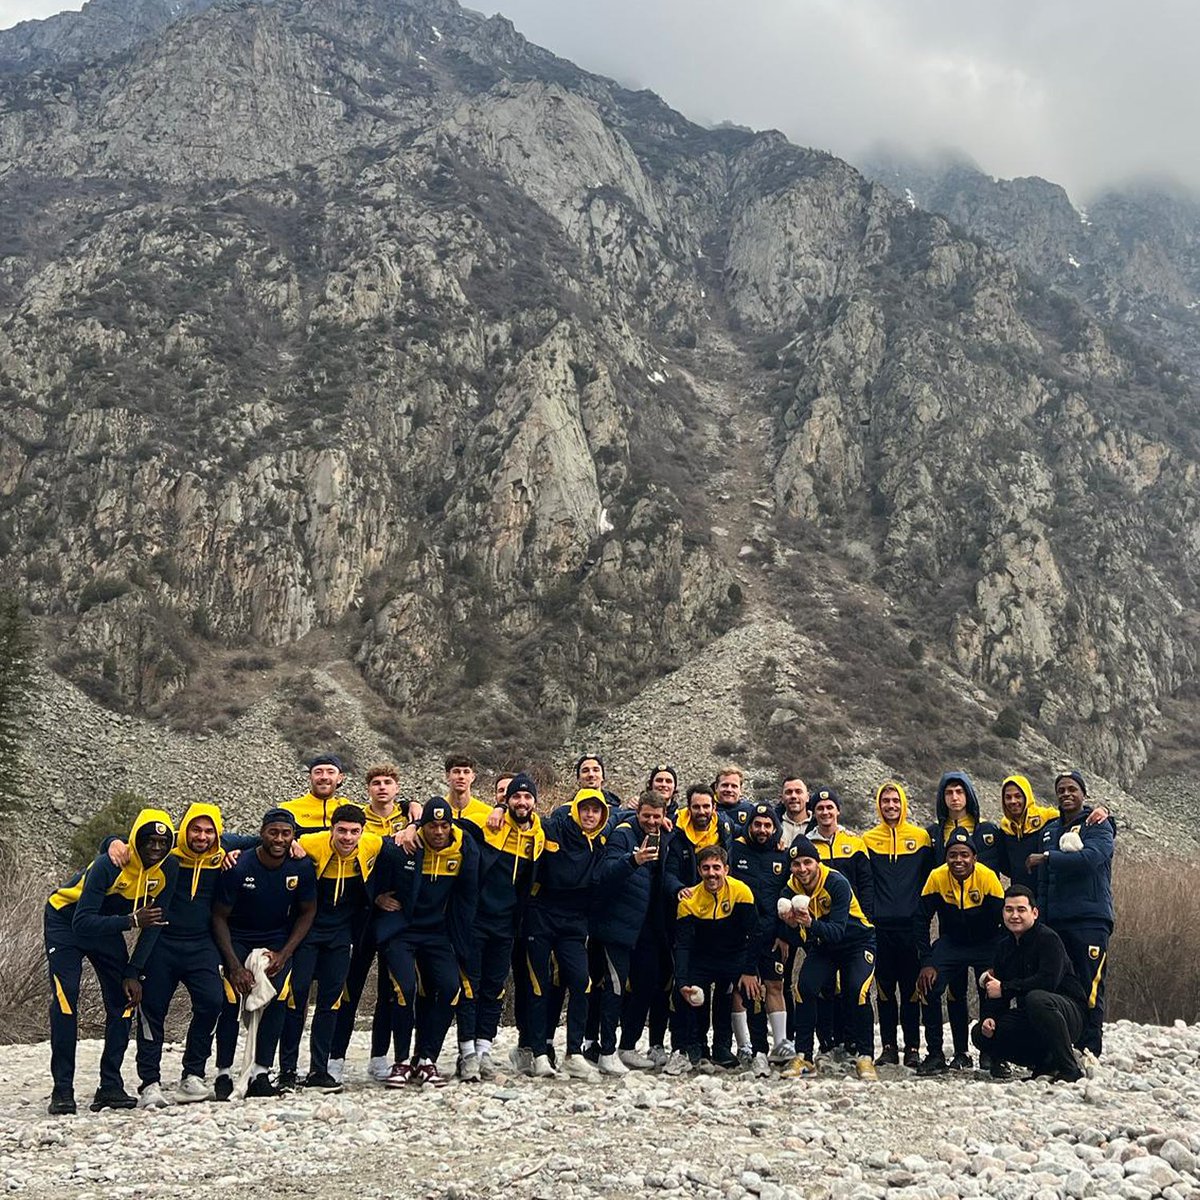 When stuck in Kyrgyzstan due to flight cancellations, why not explore! 🏔

#CCMFC #TakeUsToTheTop